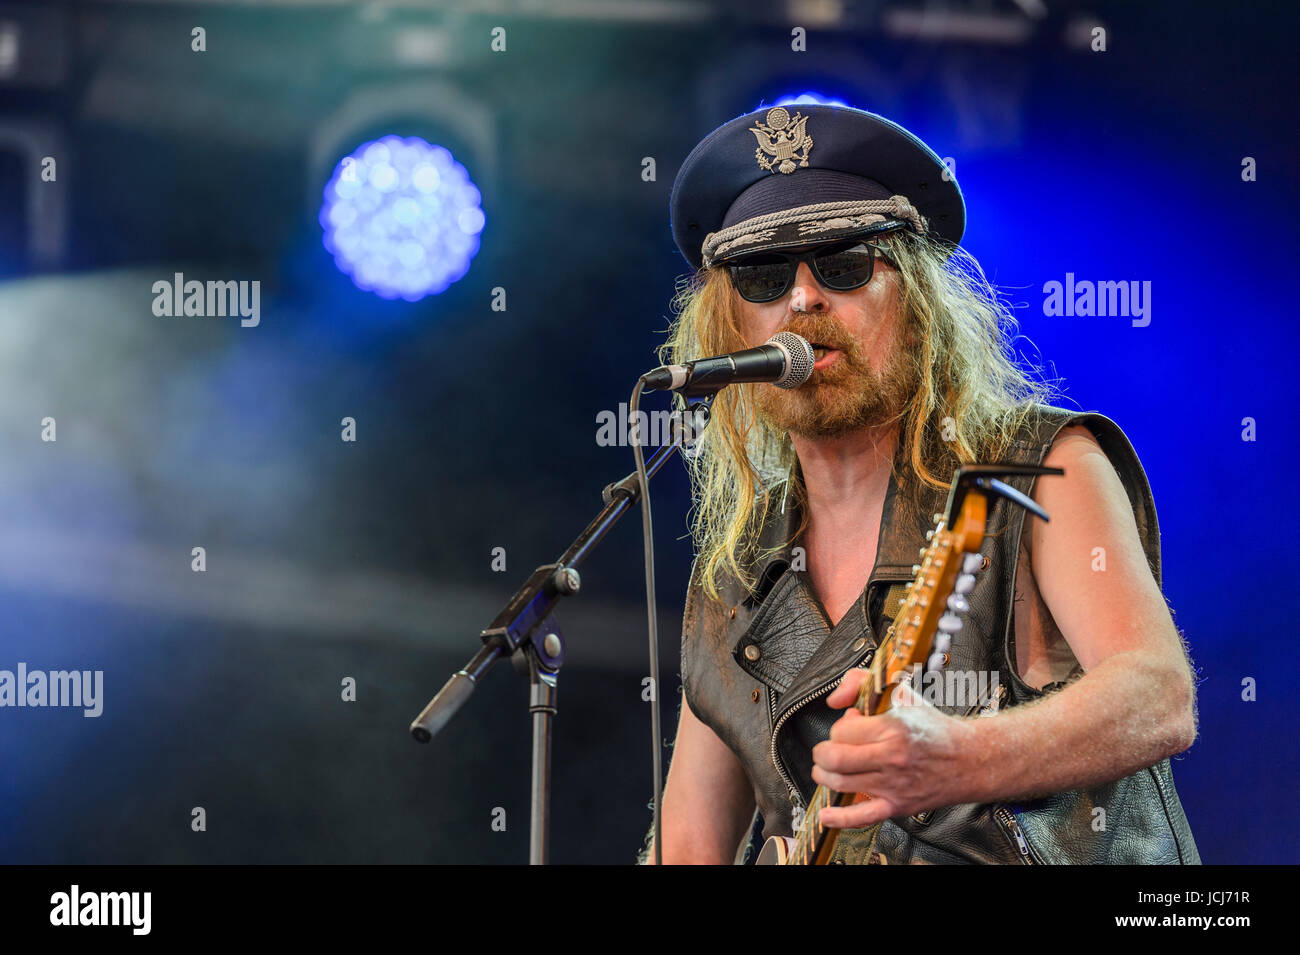 Dundrennan Scotland, UK - July 24, 2015: Julian Cope performing on the Summerisle stage during day one of the 14th Wickerman Festival Stock Photo